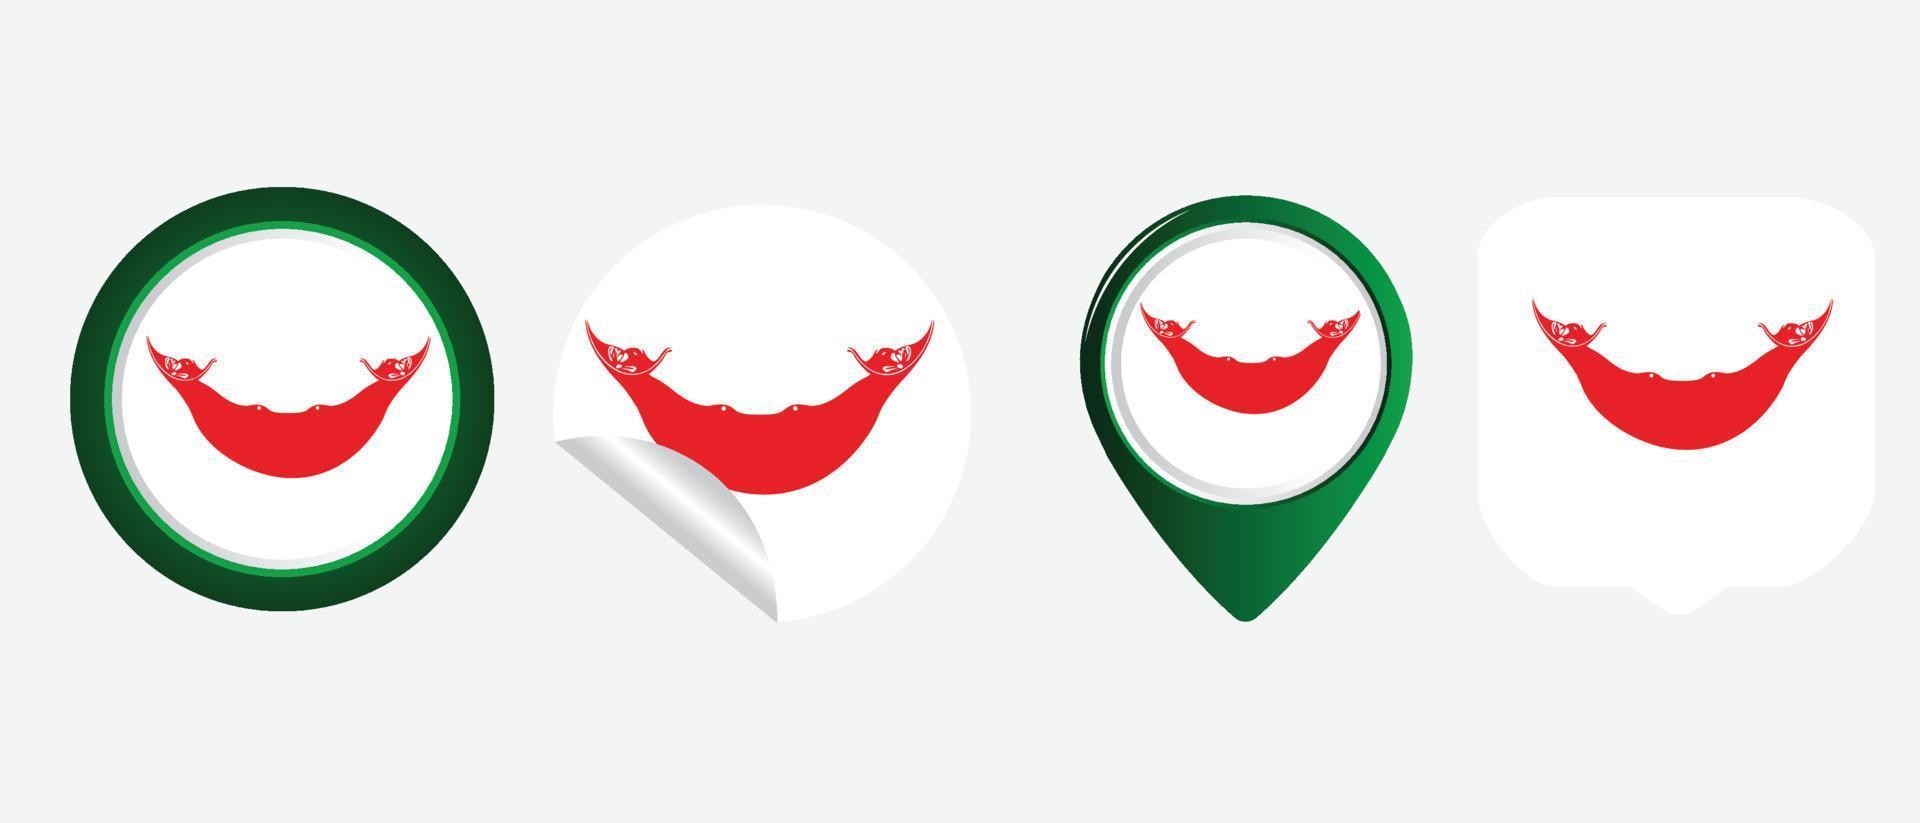 easter island rapa nui flag icon . web icon set . icons collection flat. Simple vector illustration.